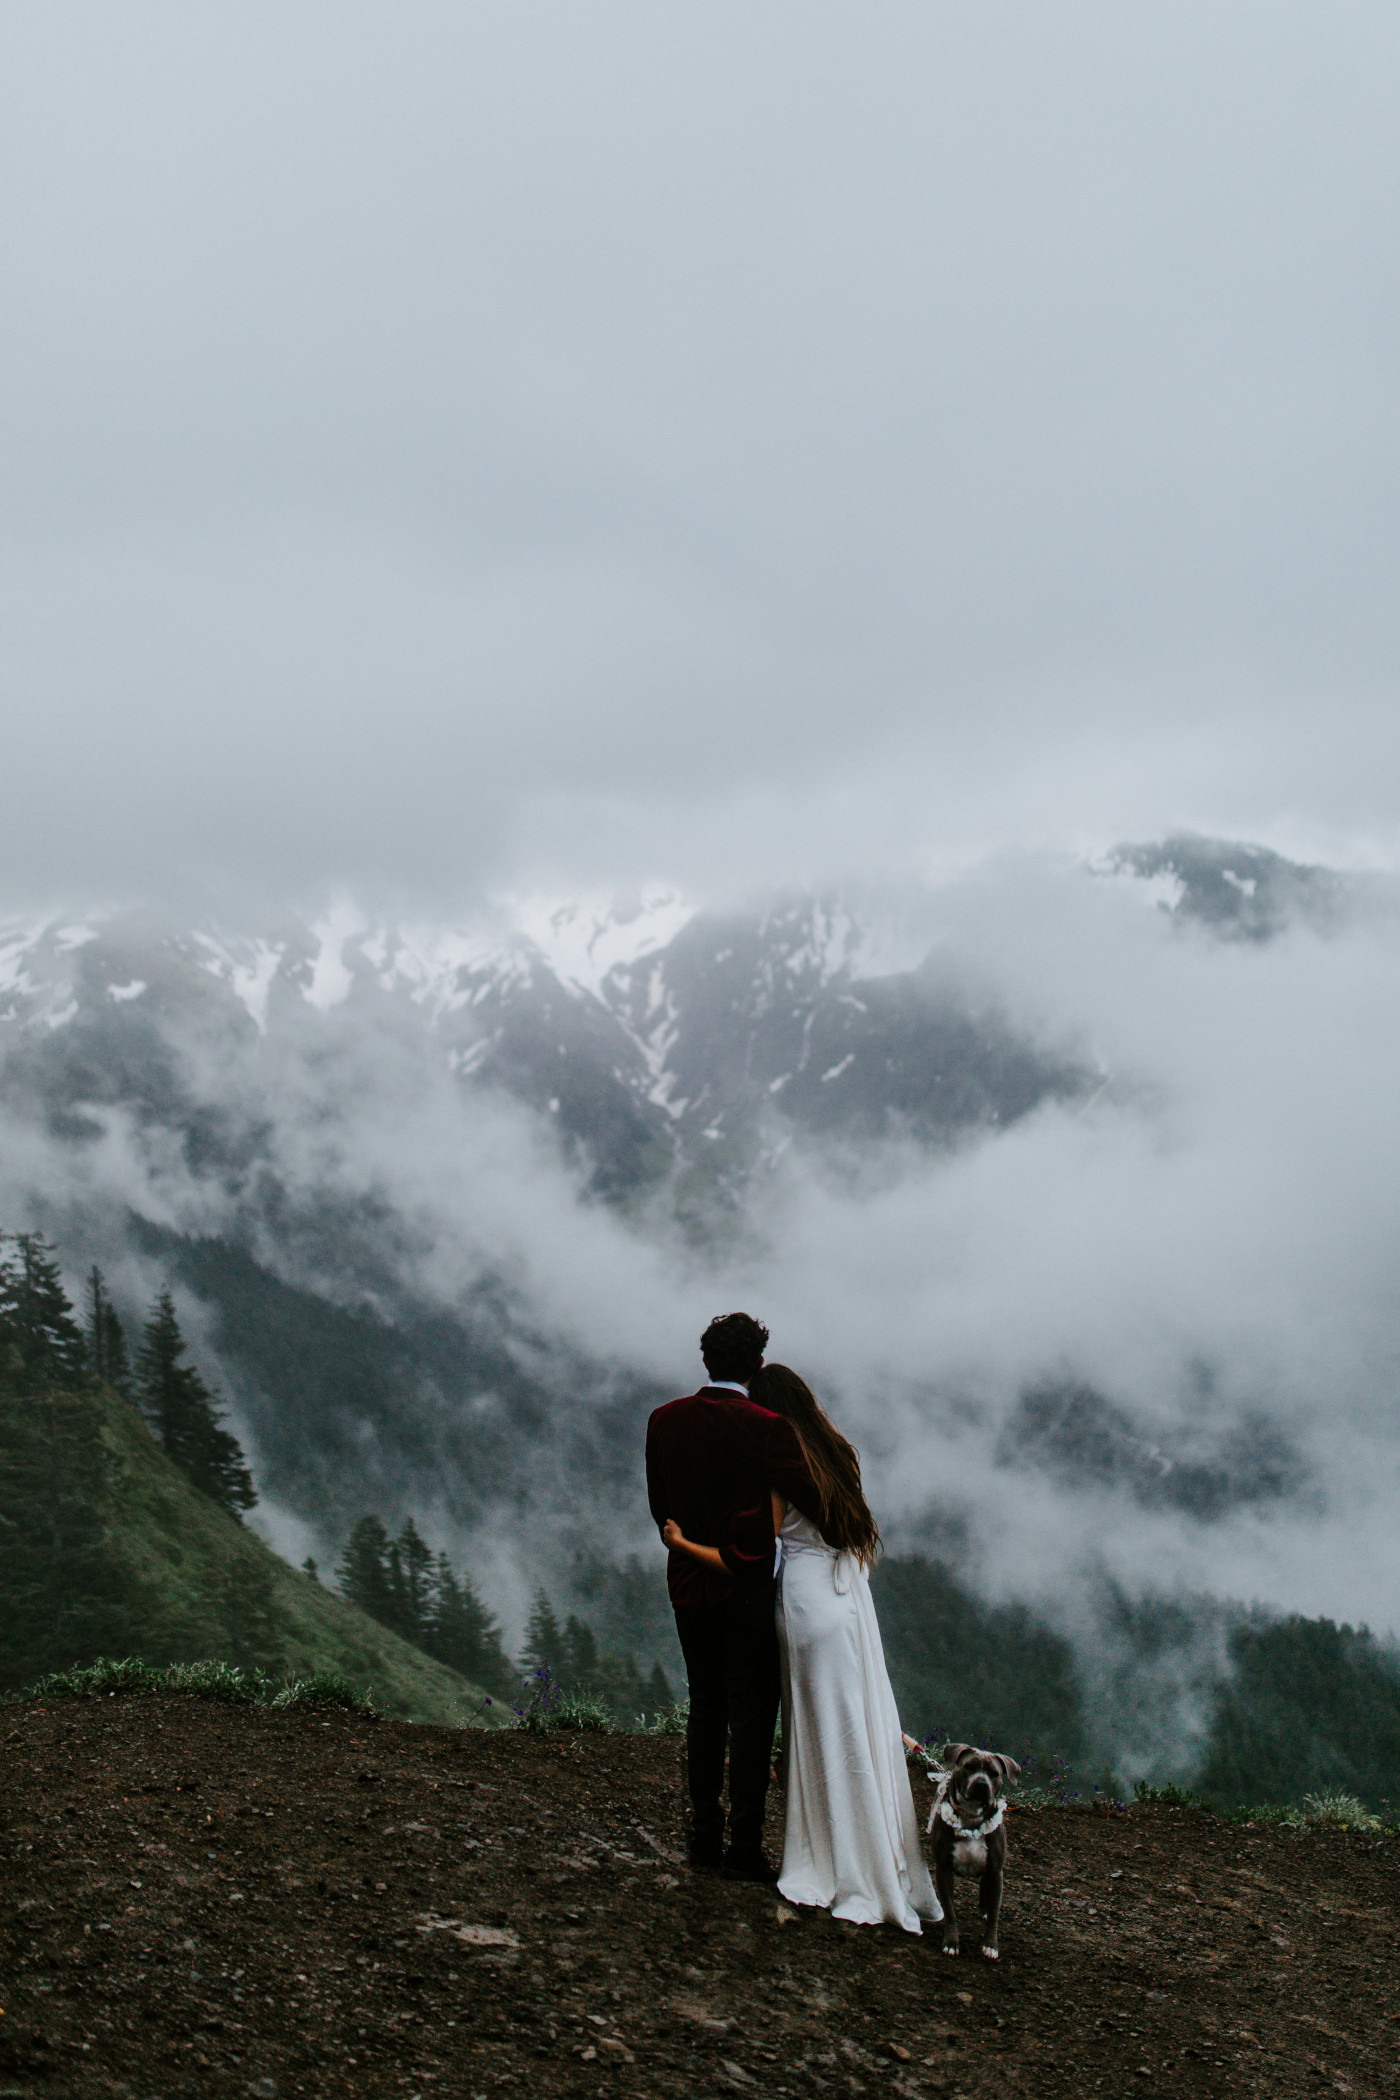 Katelyn and Murray enjoy the view of the mountain. Elopement wedding photography at Mount Hood by Sienna Plus Josh.